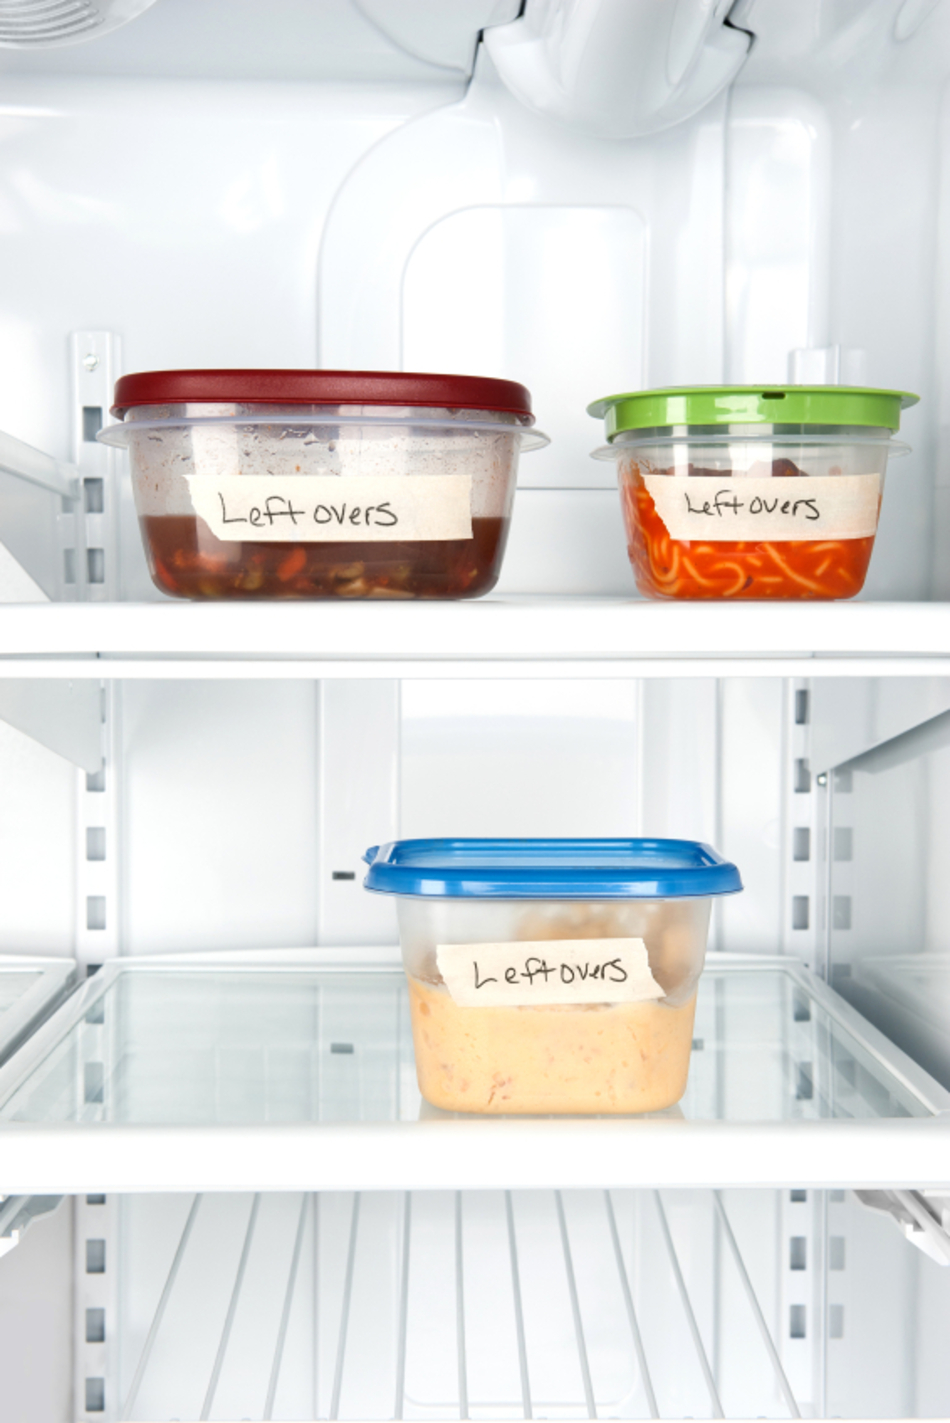 Leftovers: Keep or Toss?